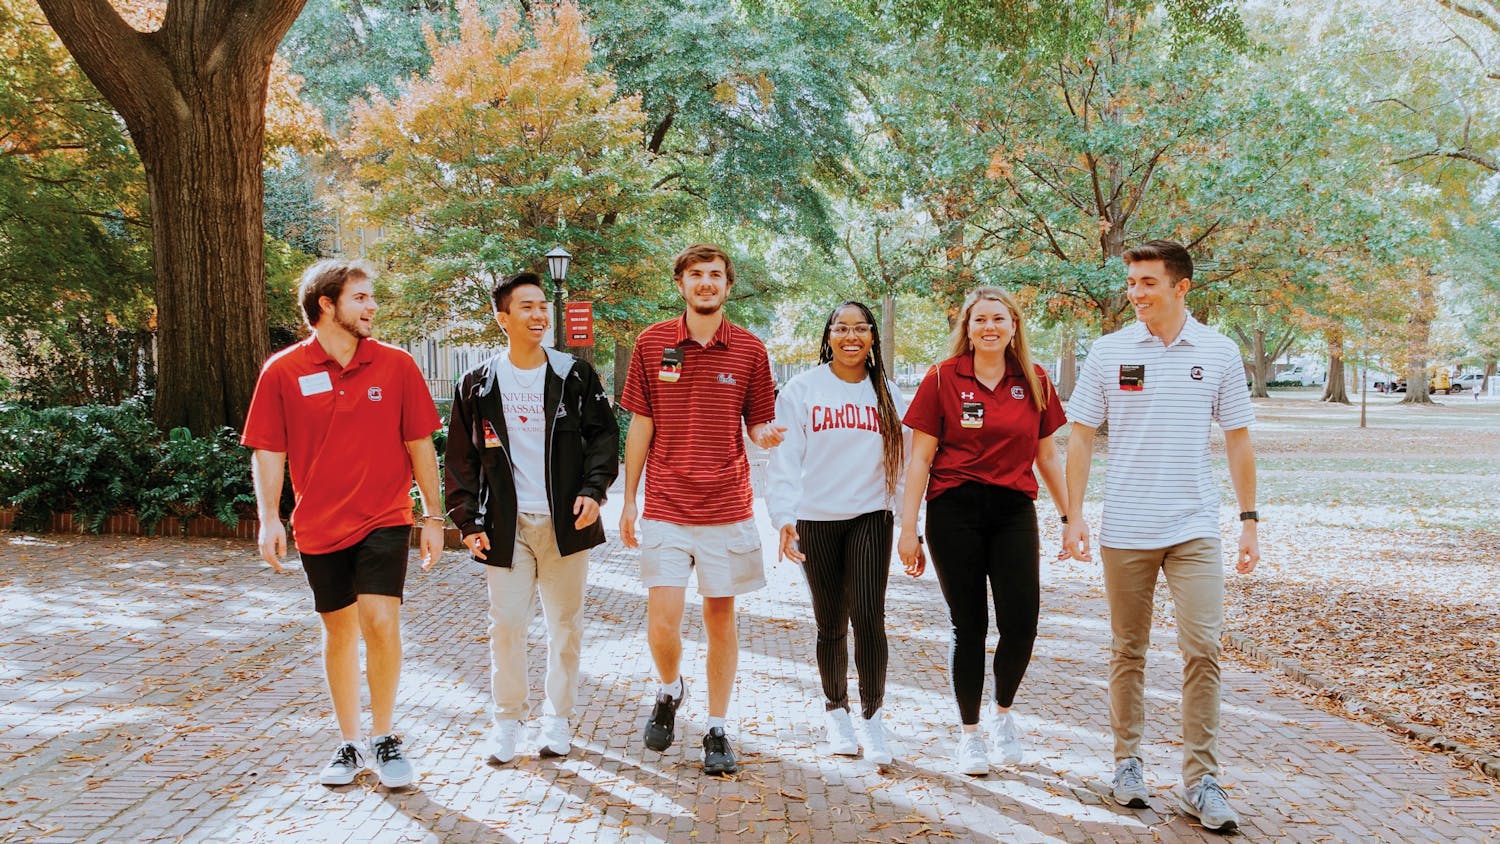 Members of the University Ambassadors team walk together on the Horseshoe. University Ambassadors help prospective students learn more about being a USC student.